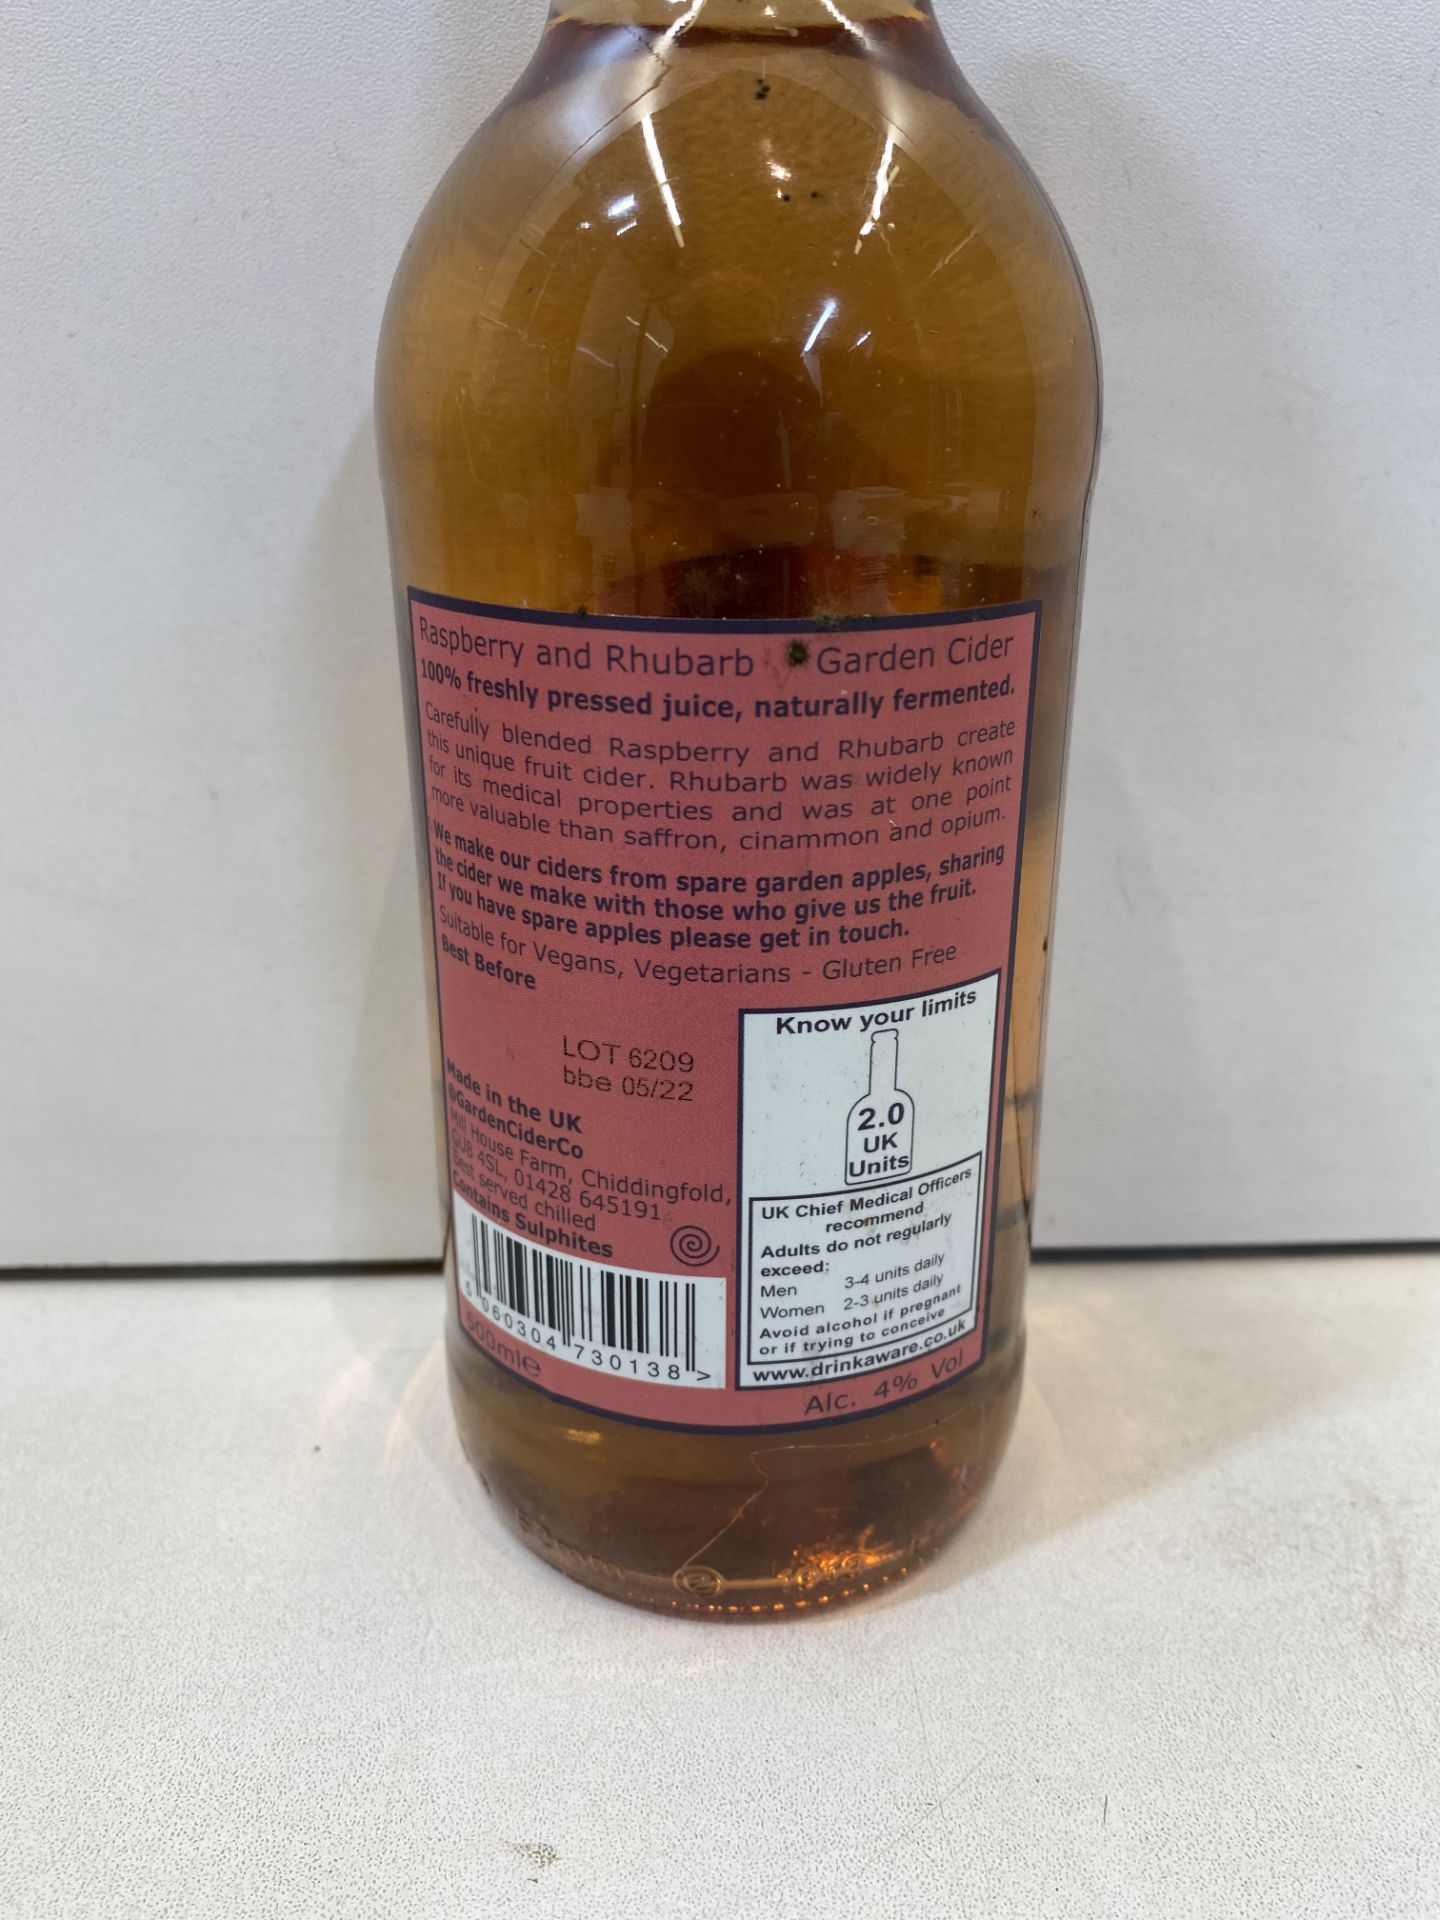 30 x Bottles Of The Garden Cider Company Raspberry & Rhubarb Cider - Best Before Date 05/22 - Image 2 of 4